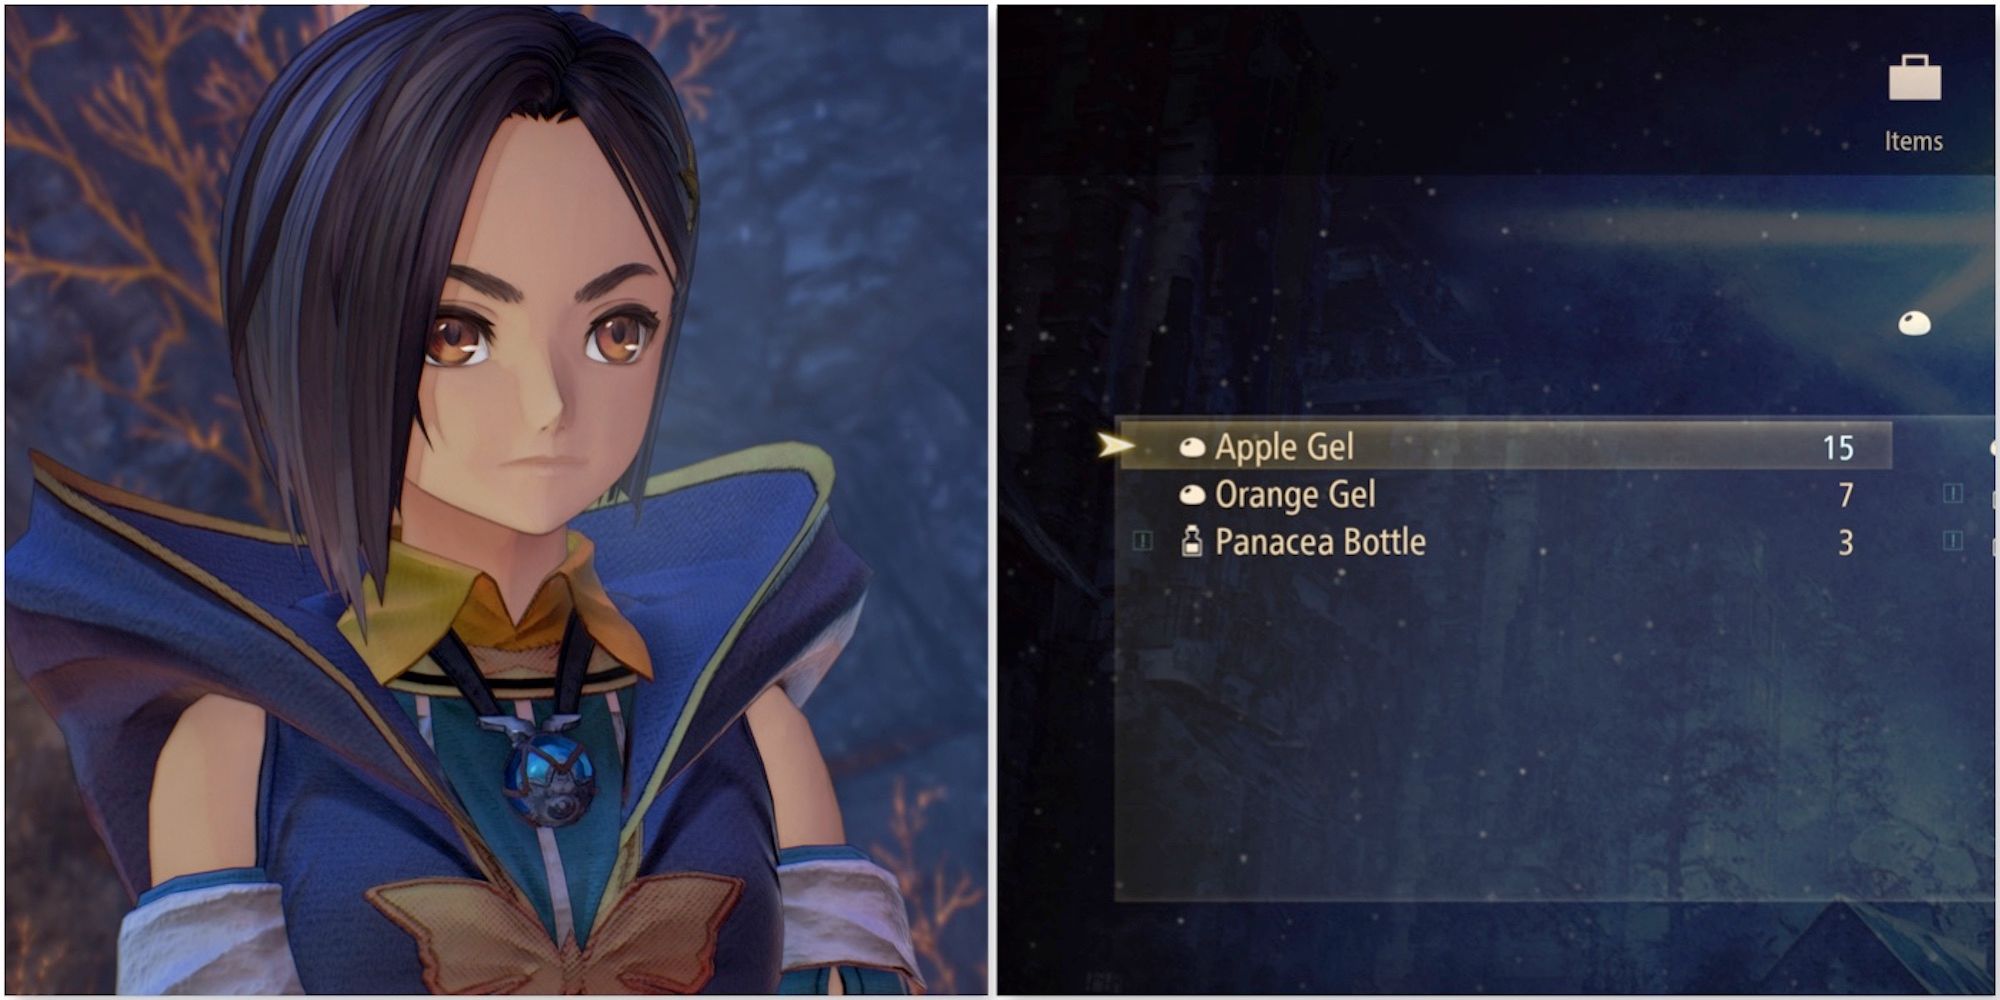 Rinwell and the item menu from Tales of Arise